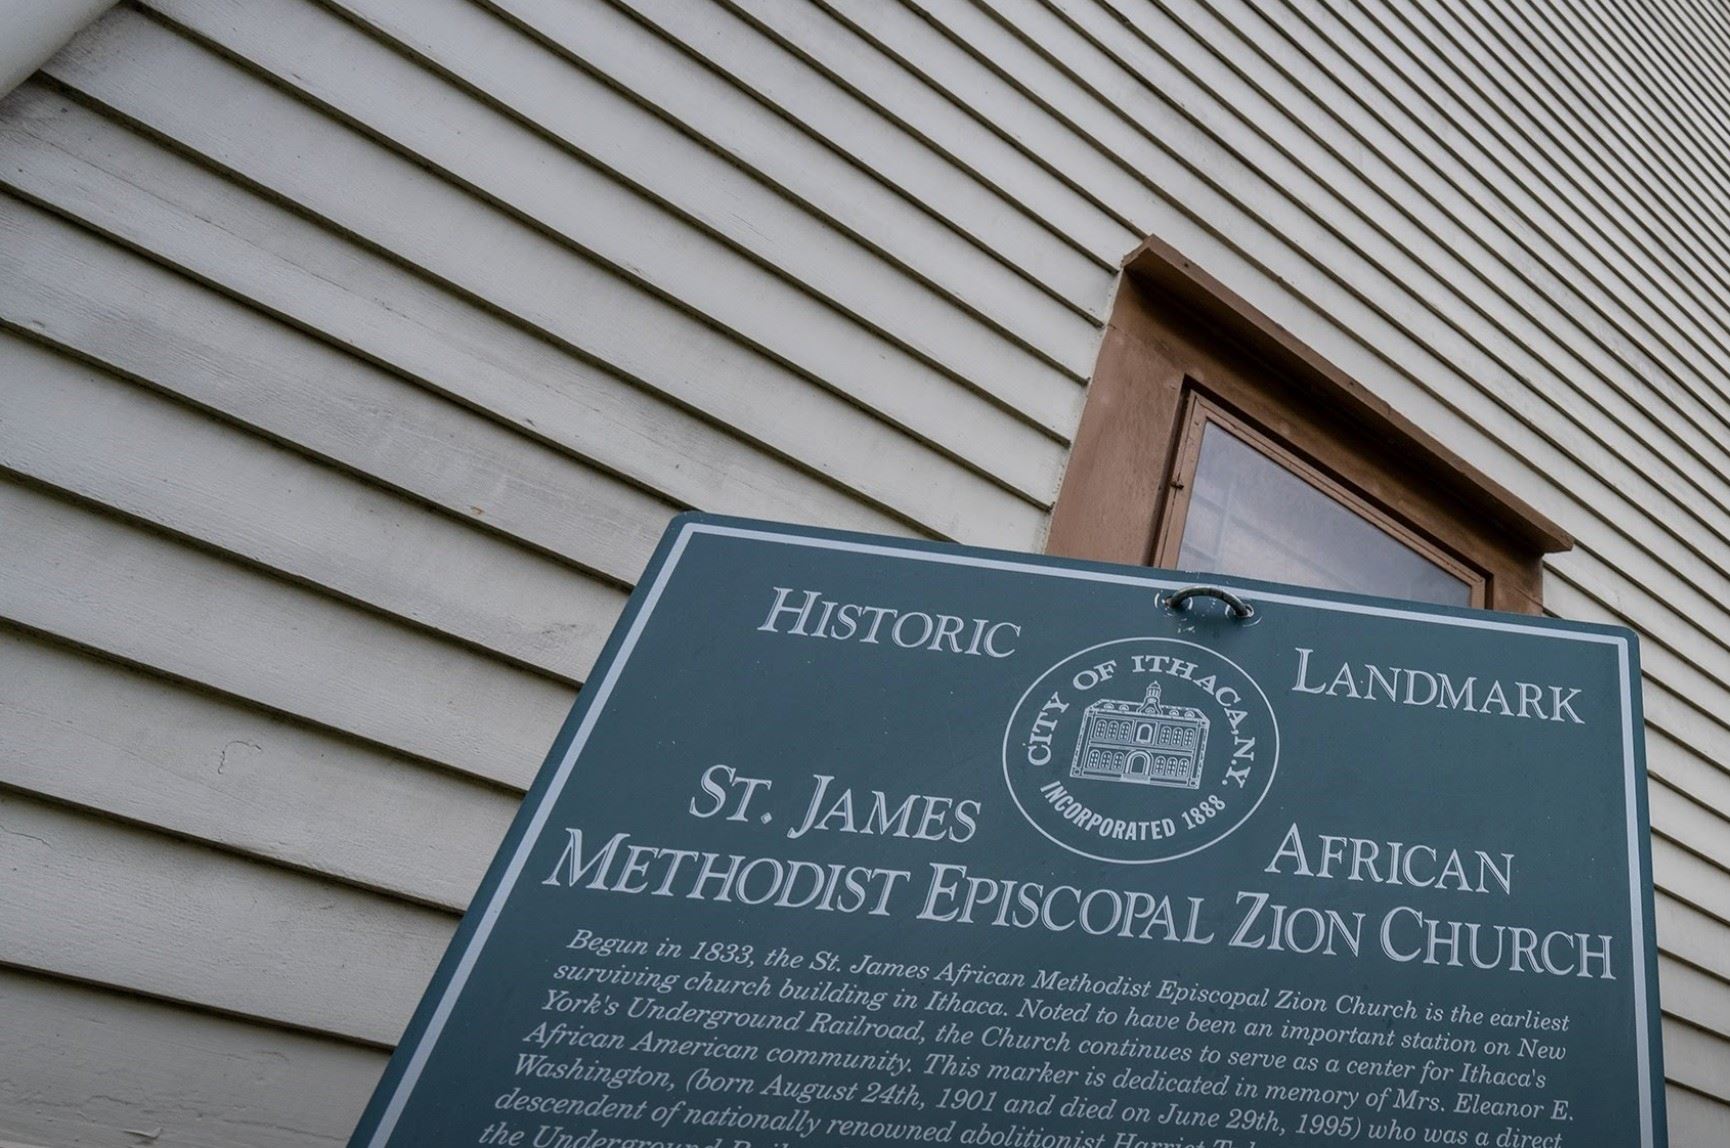 Image of the historic landmark plaque for the St. James African Methodist Episcopal Zion Church